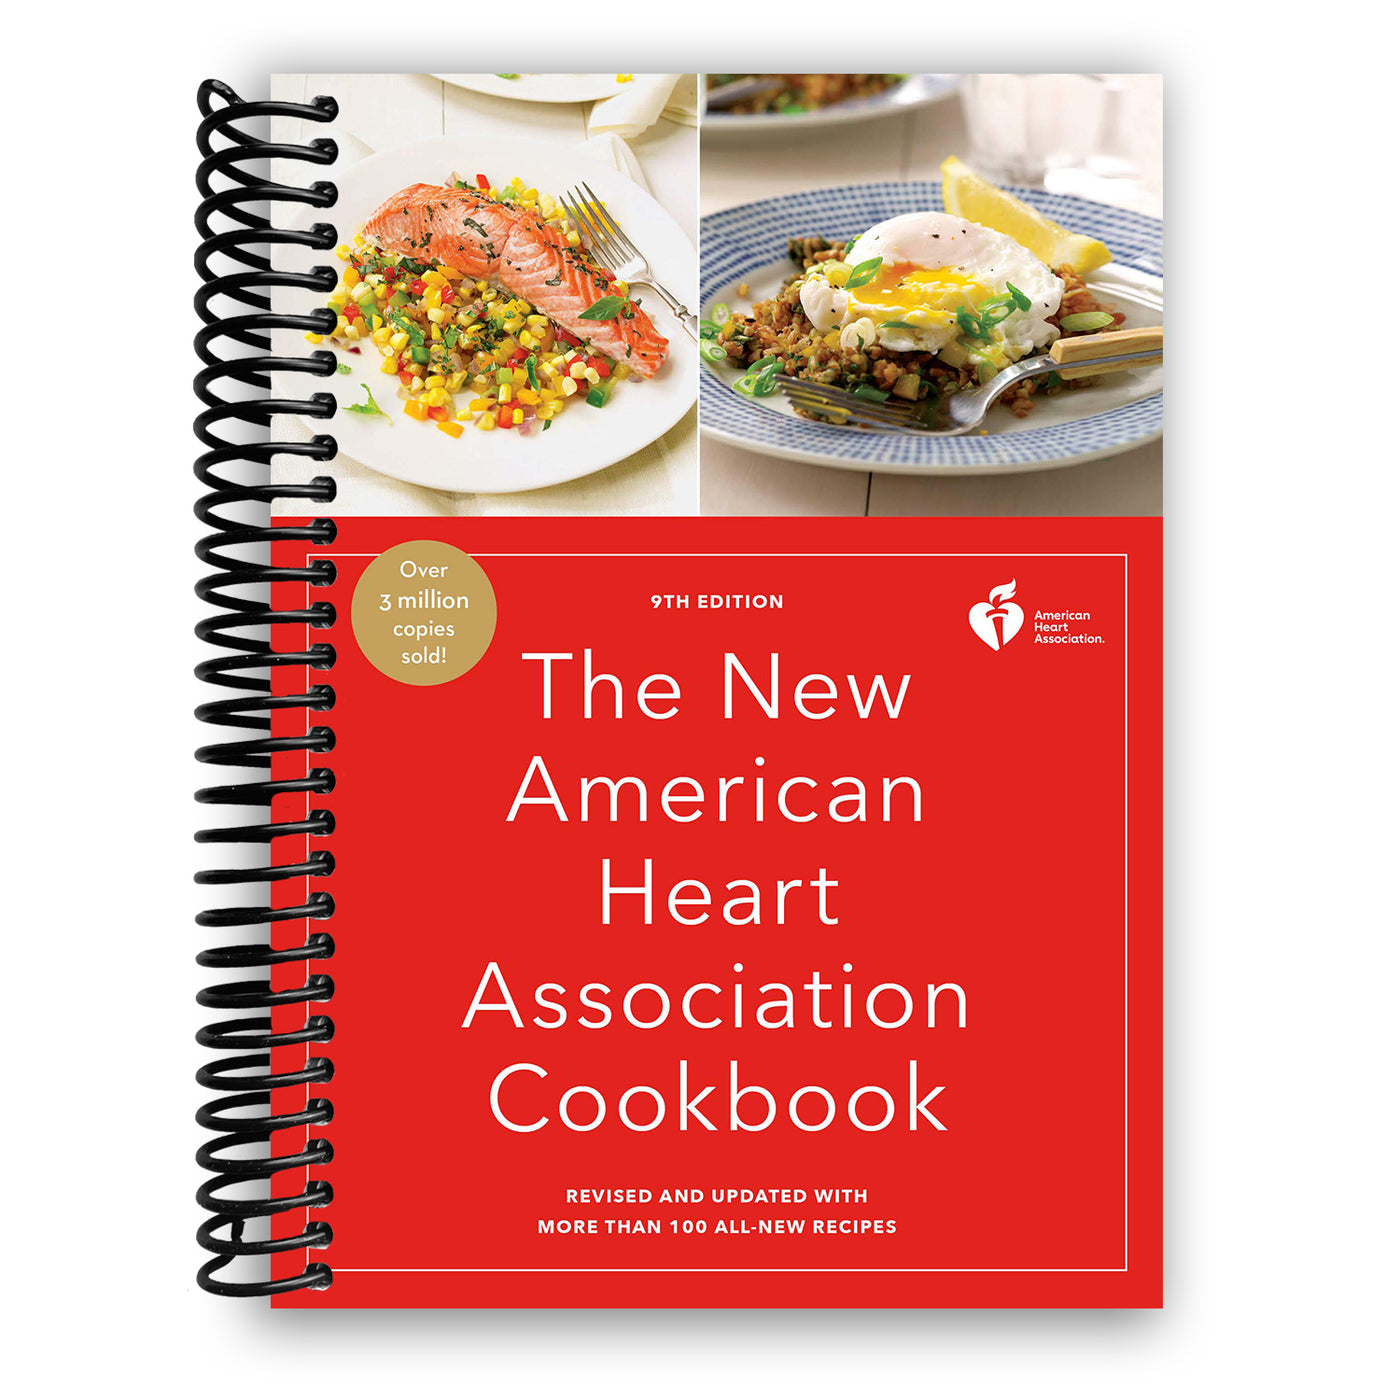 The New American Heart Association Cookbook, 9th Edition: Revised and Updated with More Than 100 All-New Recipes (Spiral Bound)